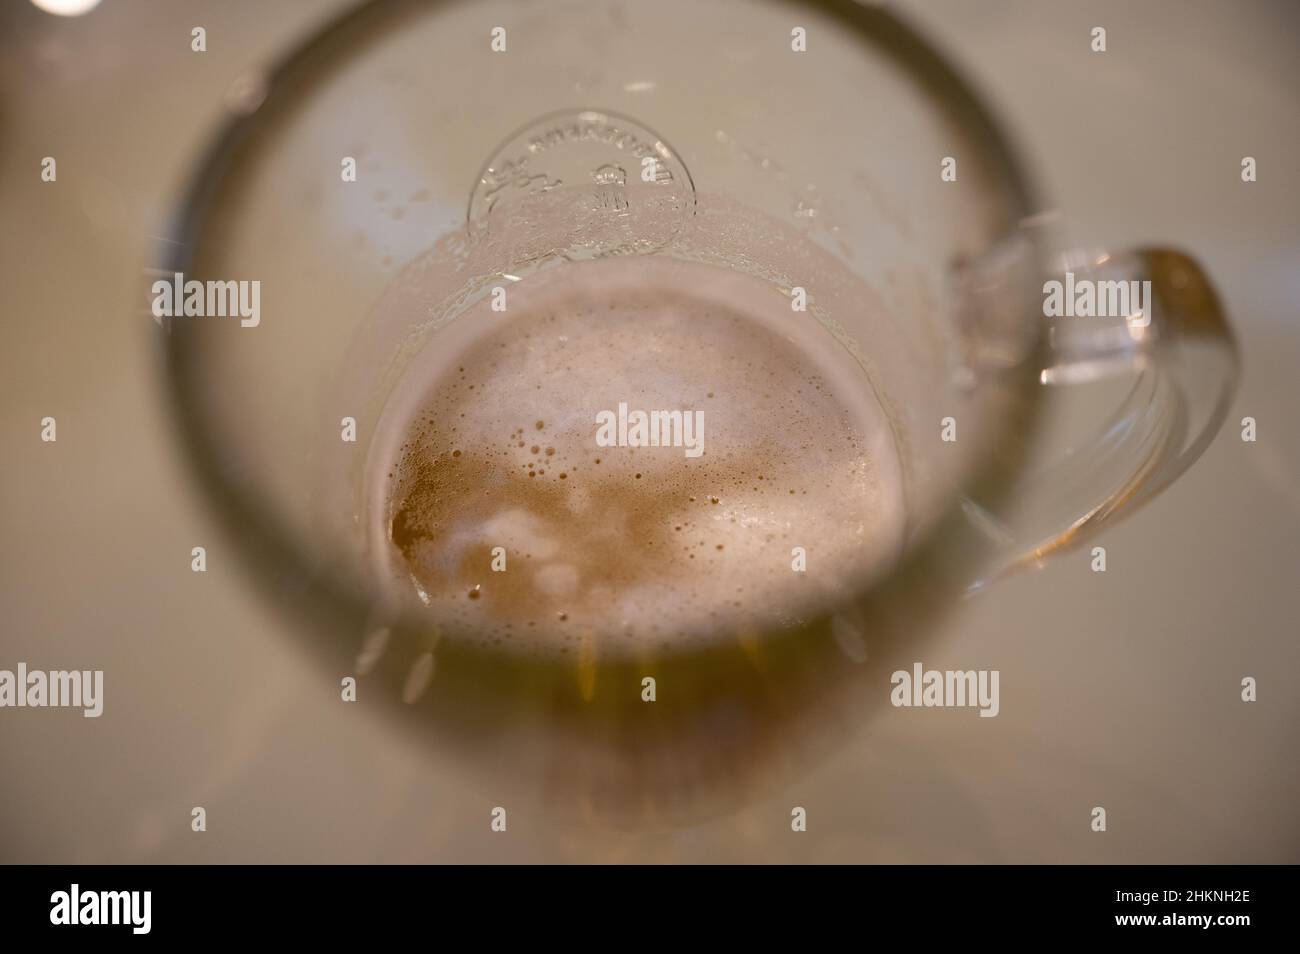 A top view of a nearly empty mug of frothy beer. Stock Photo